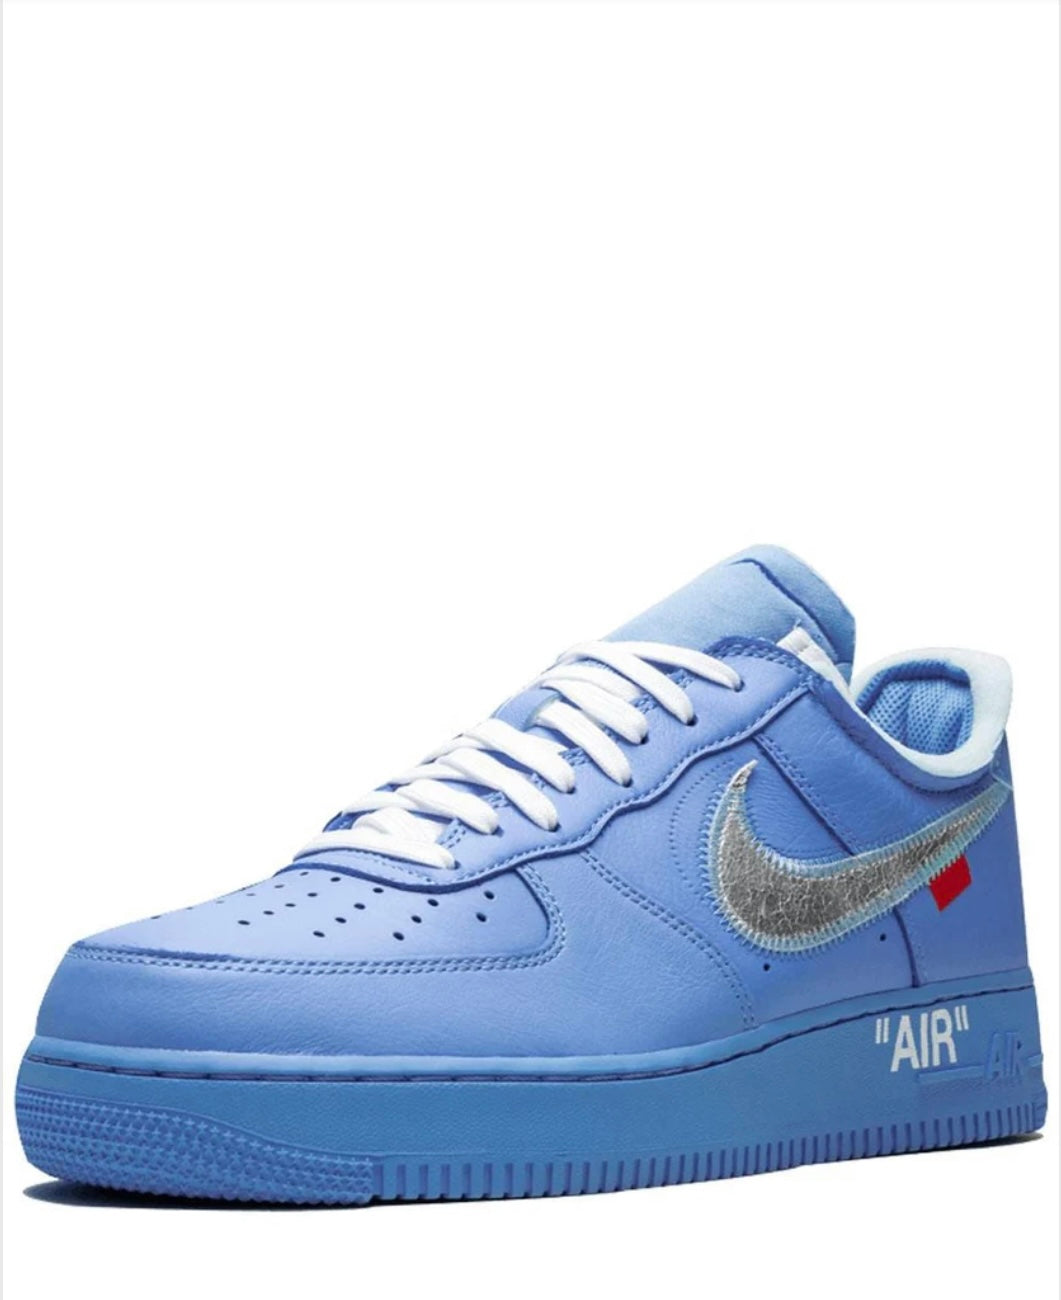 OFF-WHITE X NIKE AIR FORCE 1 LOW MCA UNIVERSITY BLUE